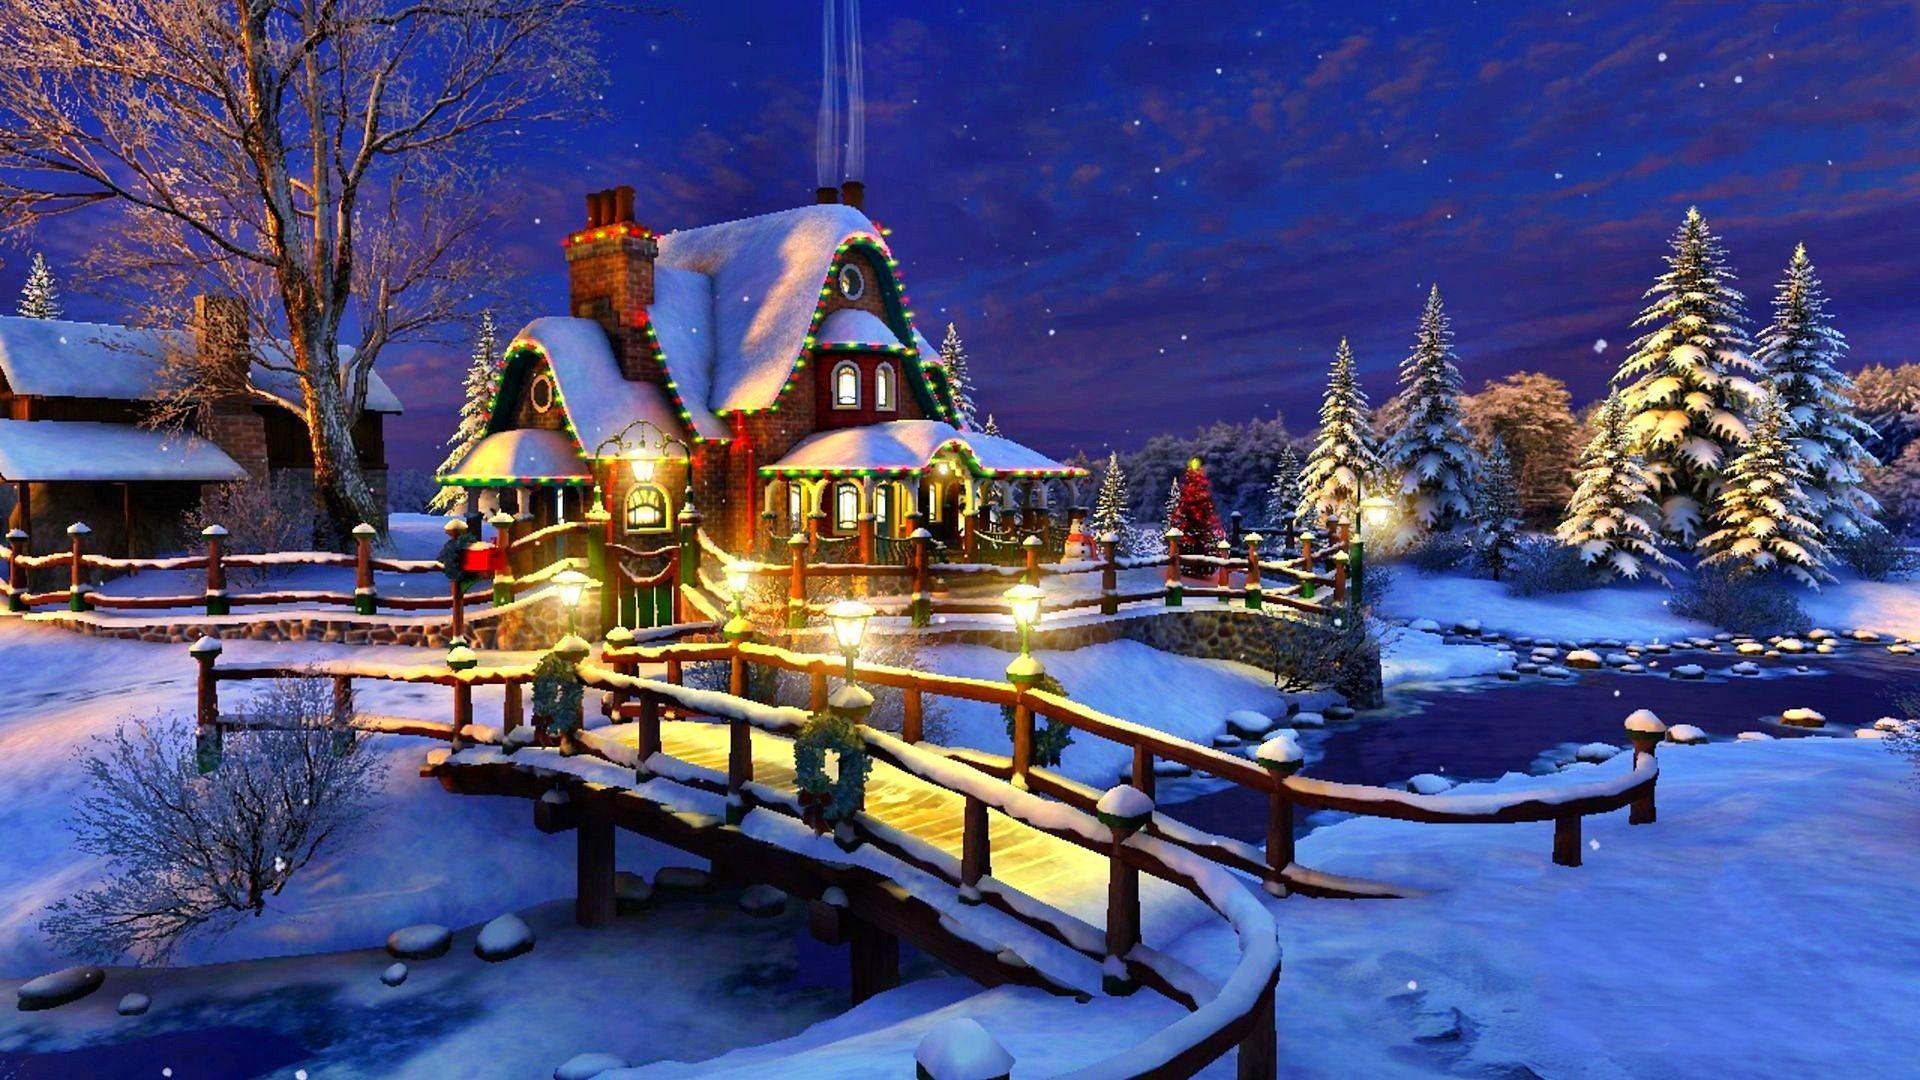 Found on Bing from wallpapermad.com. Christmas wallpaper hd, Christmas desktop wallpaper, Christmas desktop